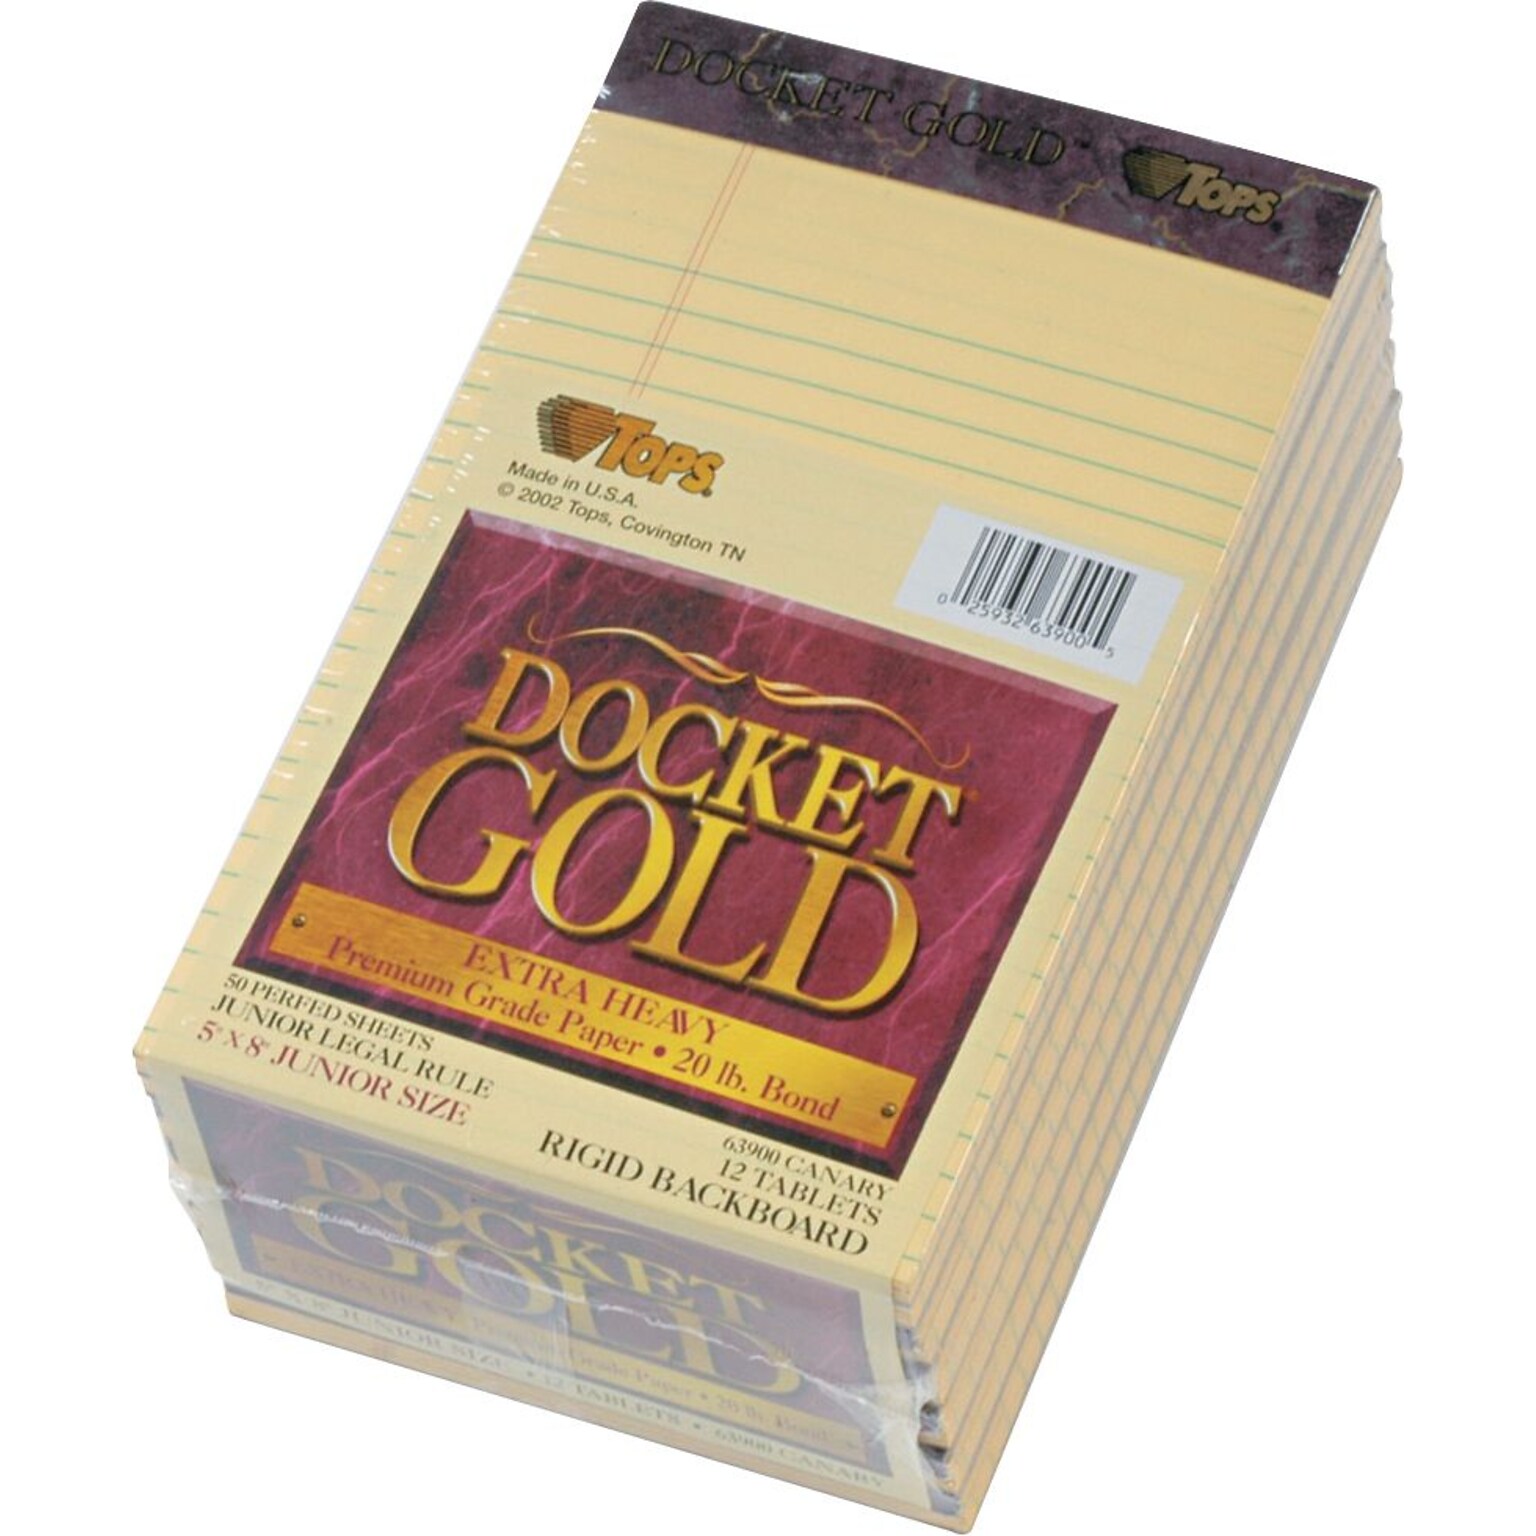 Docket® Gold Notepad, Canary, 20 lb, Rigid Back, 50 Sheets/Pad, 12 Pads/Pack, 5 x 8